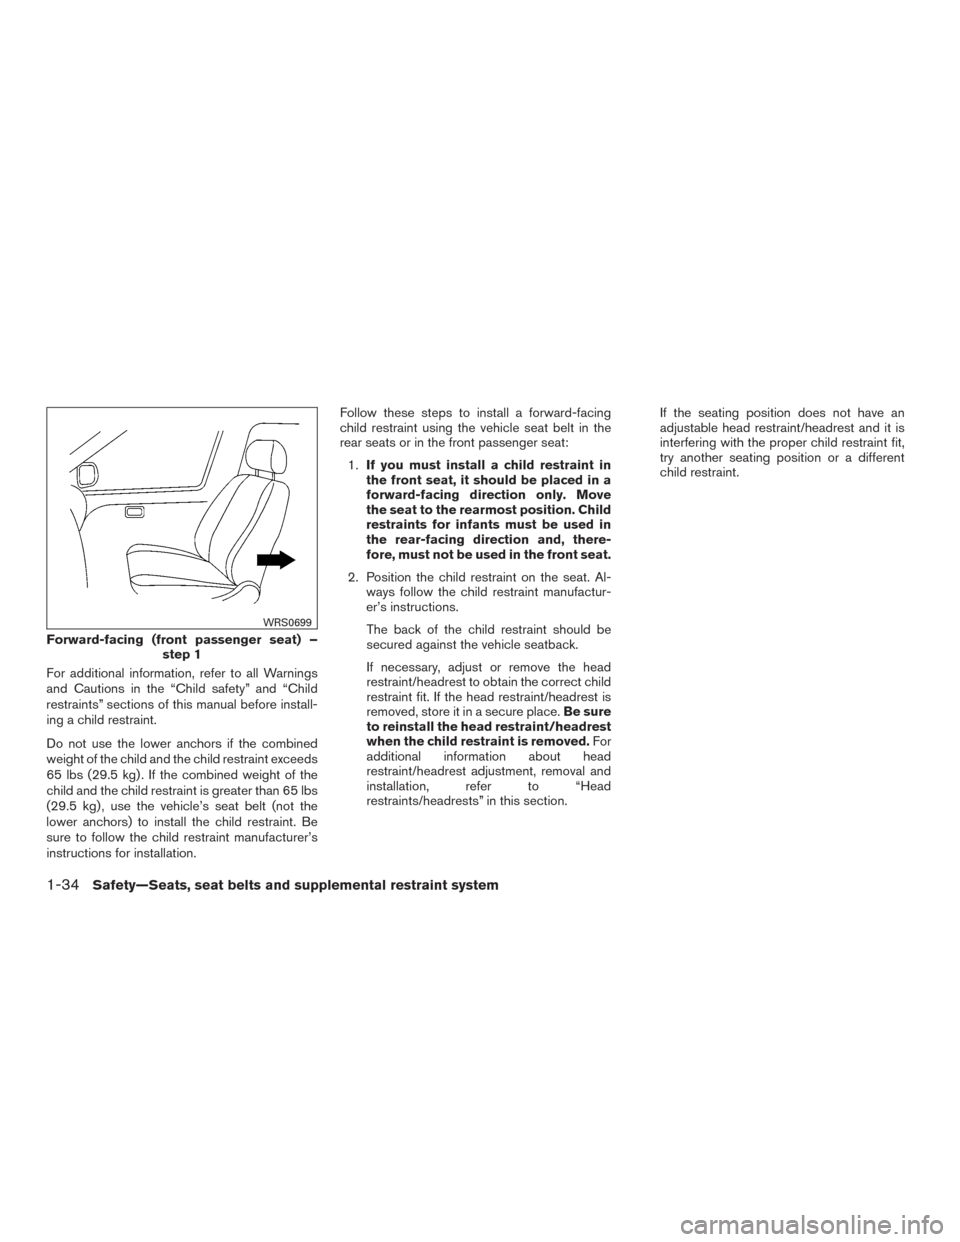 NISSAN SENTRA 2016 B17 / 7.G Owners Guide For additional information, refer to all Warnings
and Cautions in the “Child safety” and “Child
restraints” sections of this manual before install-
ing a child restraint.
Do not use the lower 